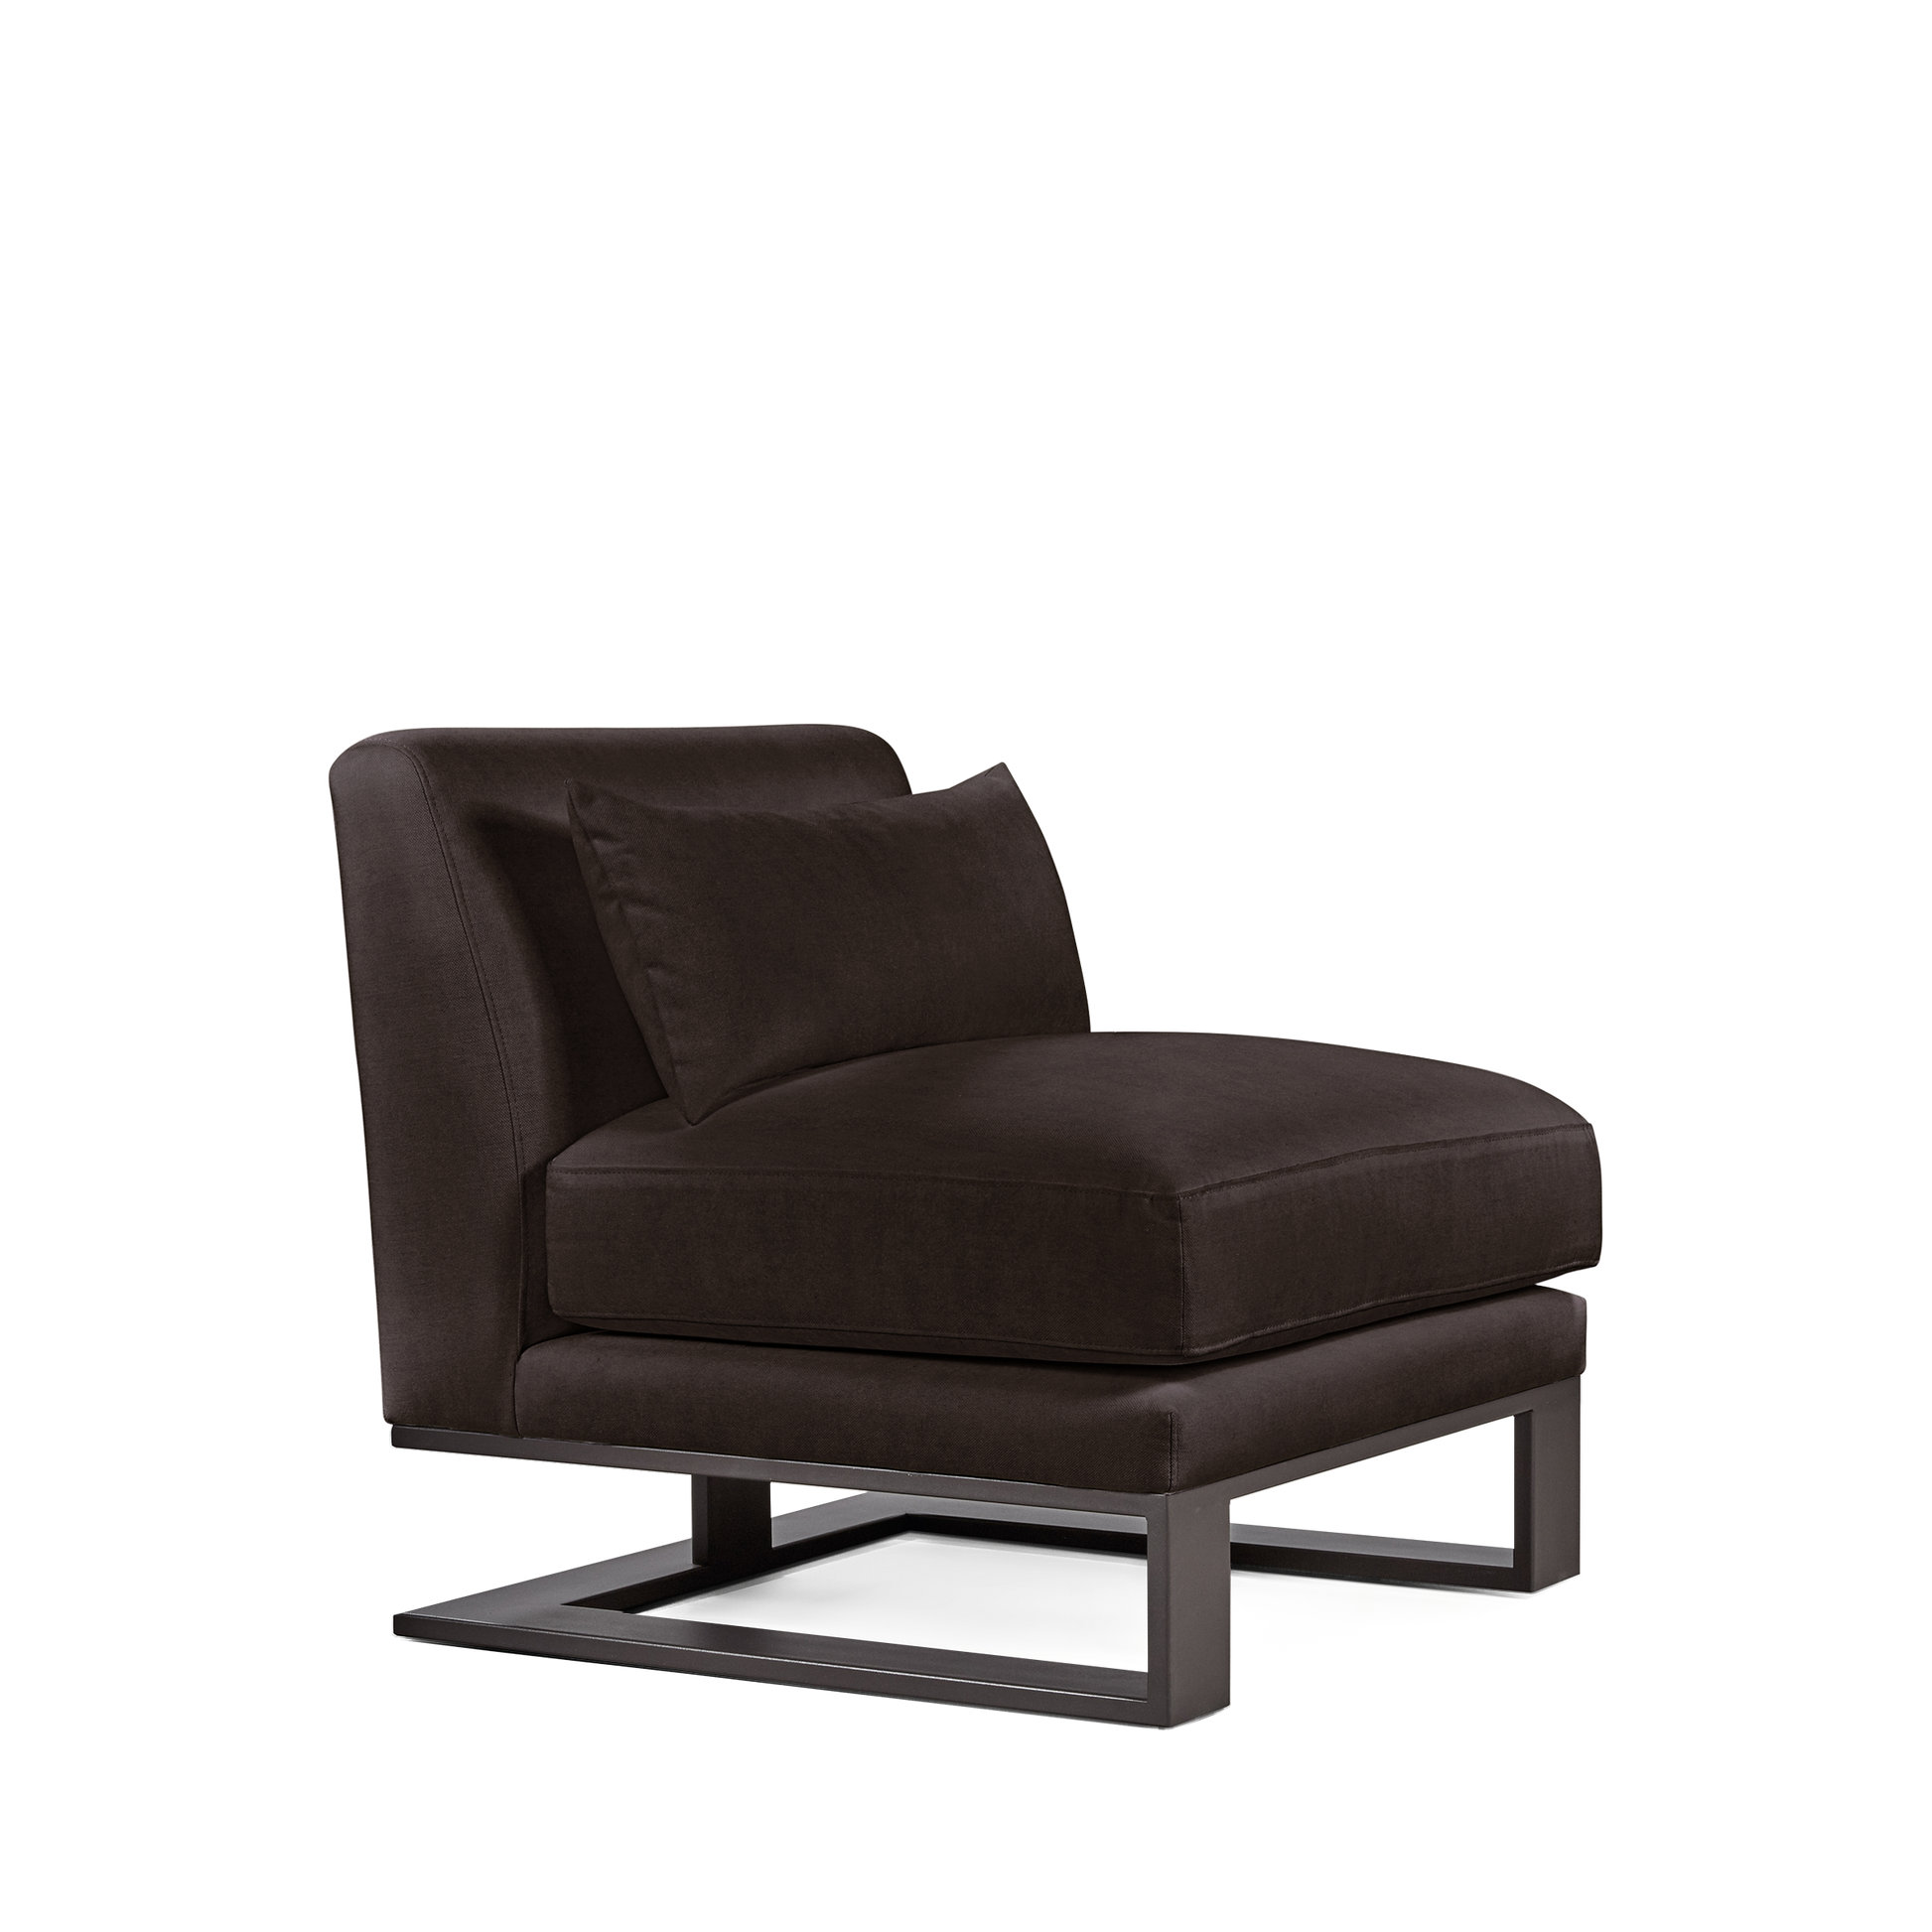 Alpes armchair with dark brown textile and moka colored wood legs 